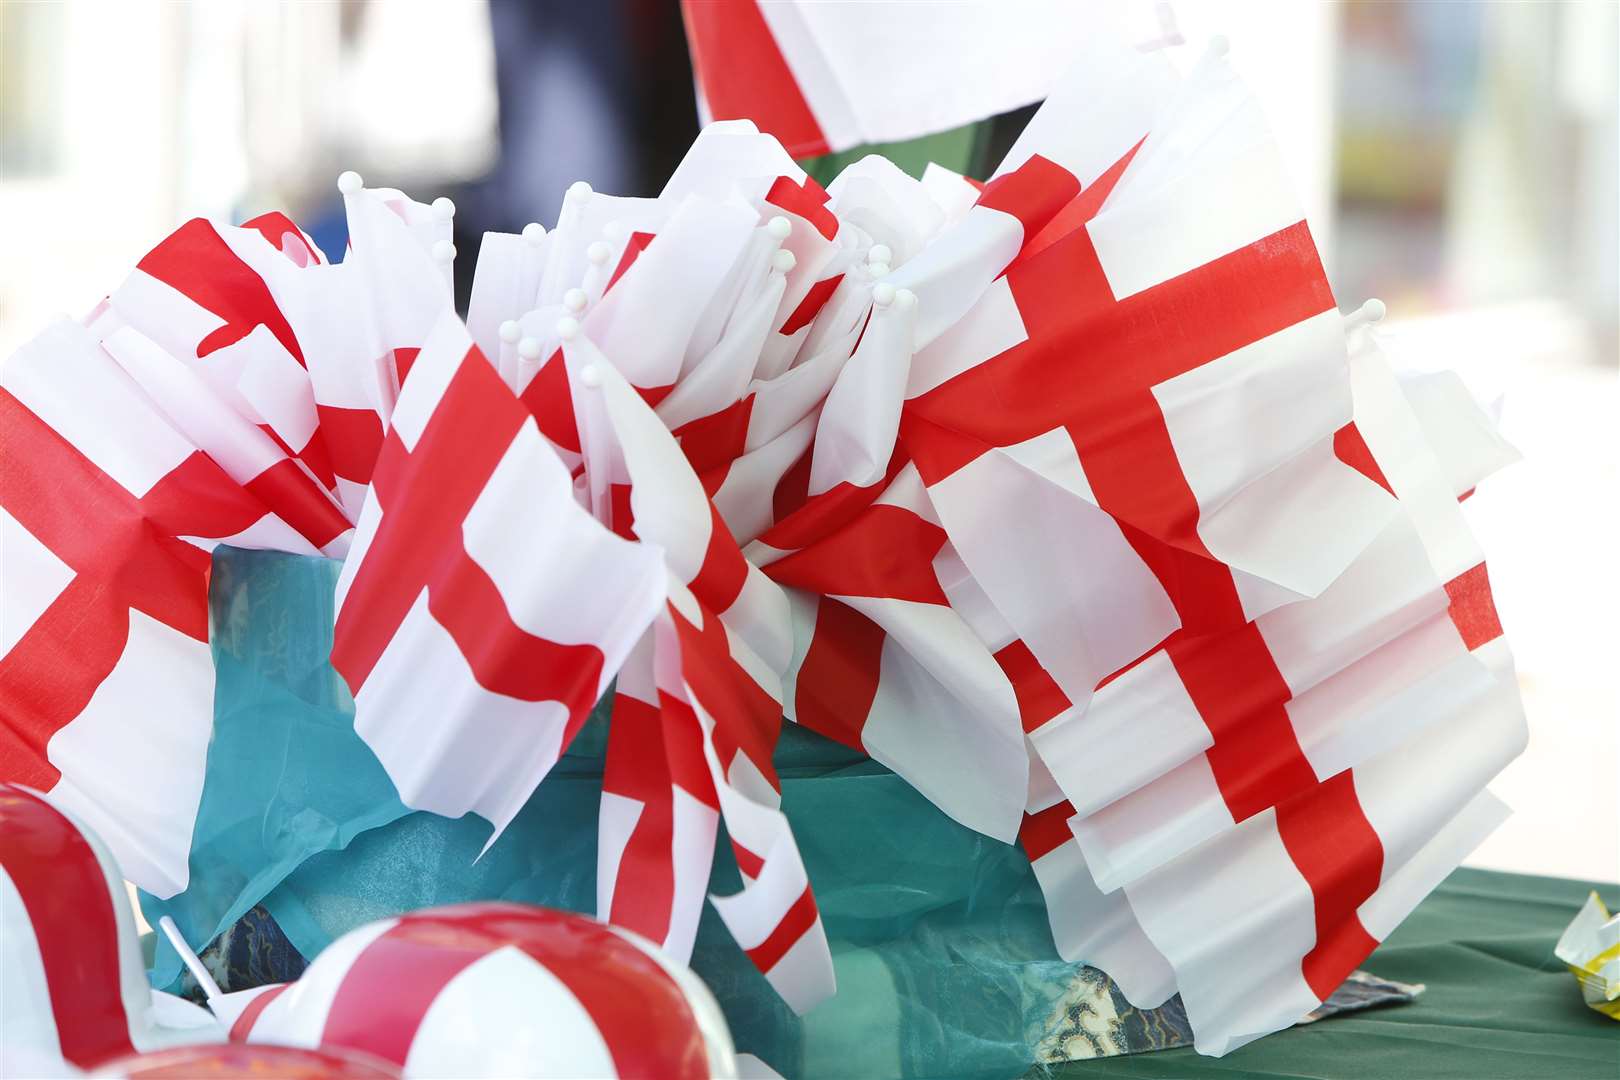 Should St George’s Day be a bank holiday?